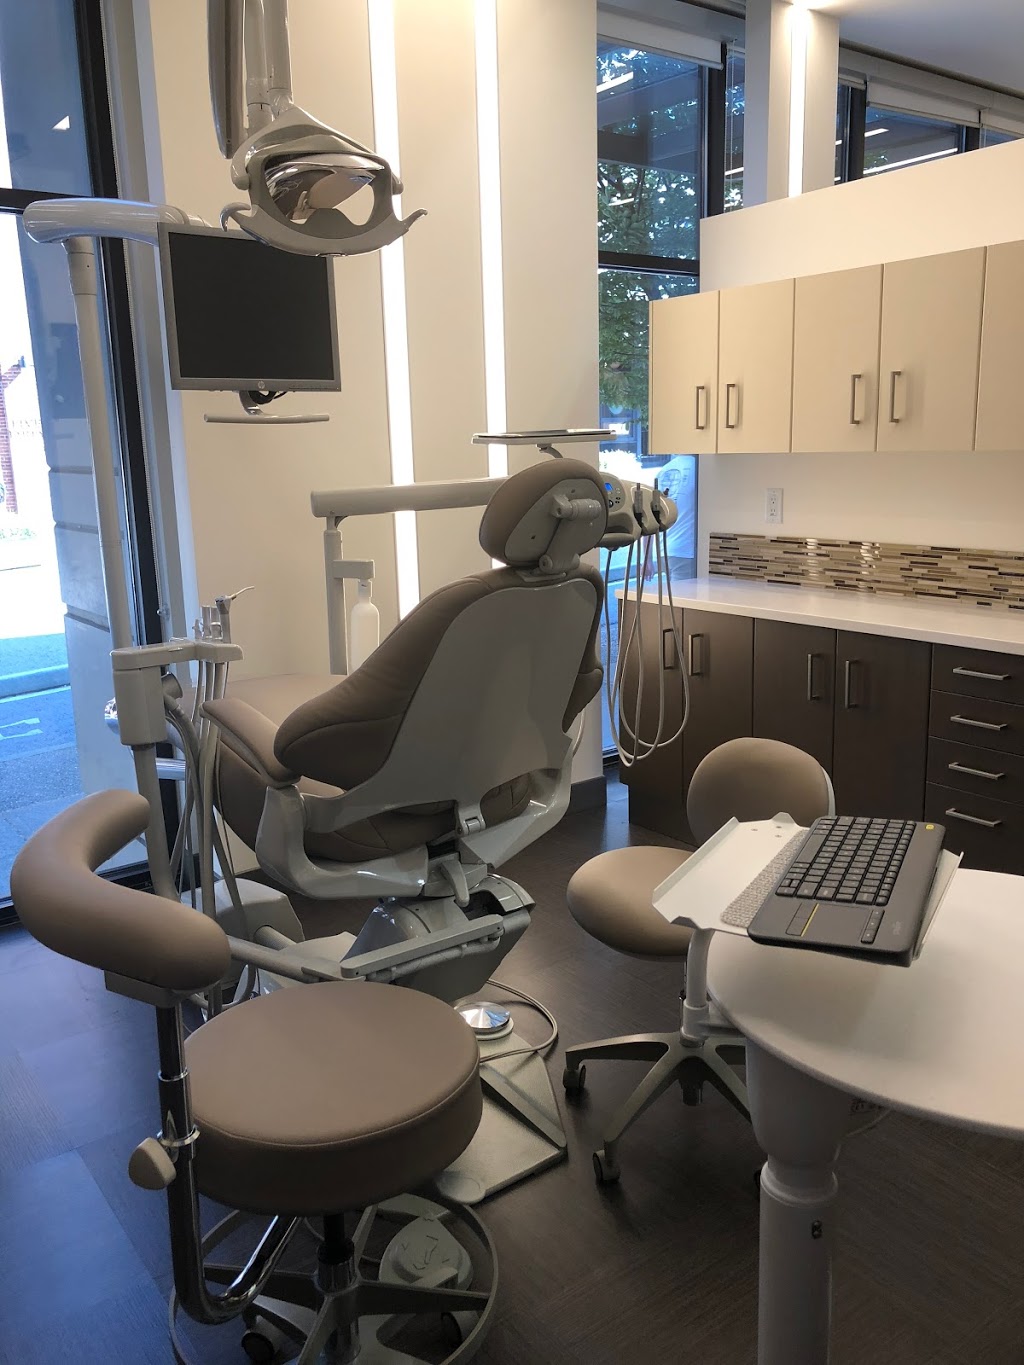 Aarm Dental Group on Beatty | dentist | 529 Beatty St, Vancouver, BC V6B 0C5, Canada | 6046991901 OR +1 604-699-1901